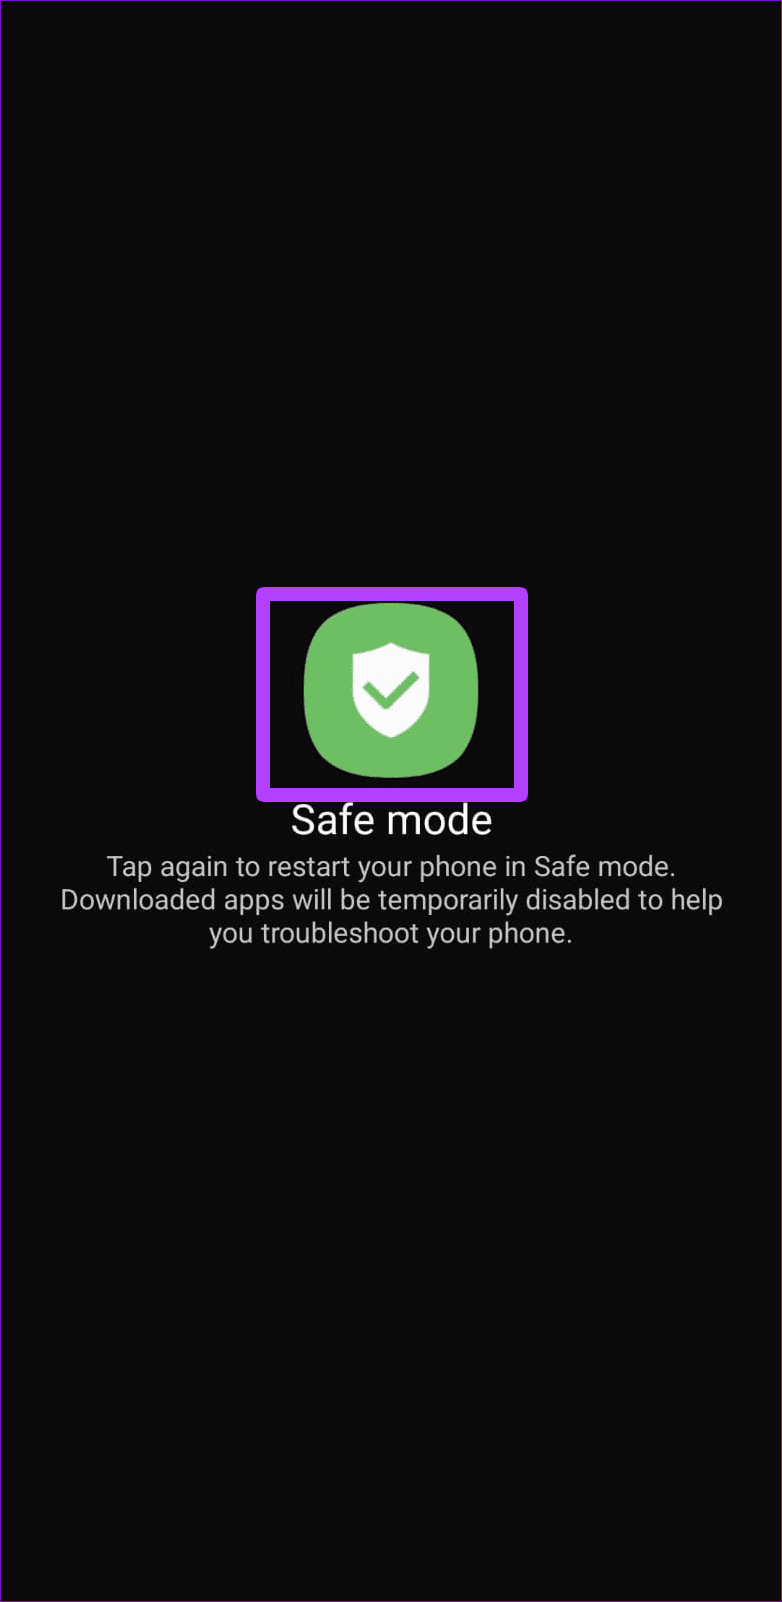 Boot Android Phone in Safe Mode